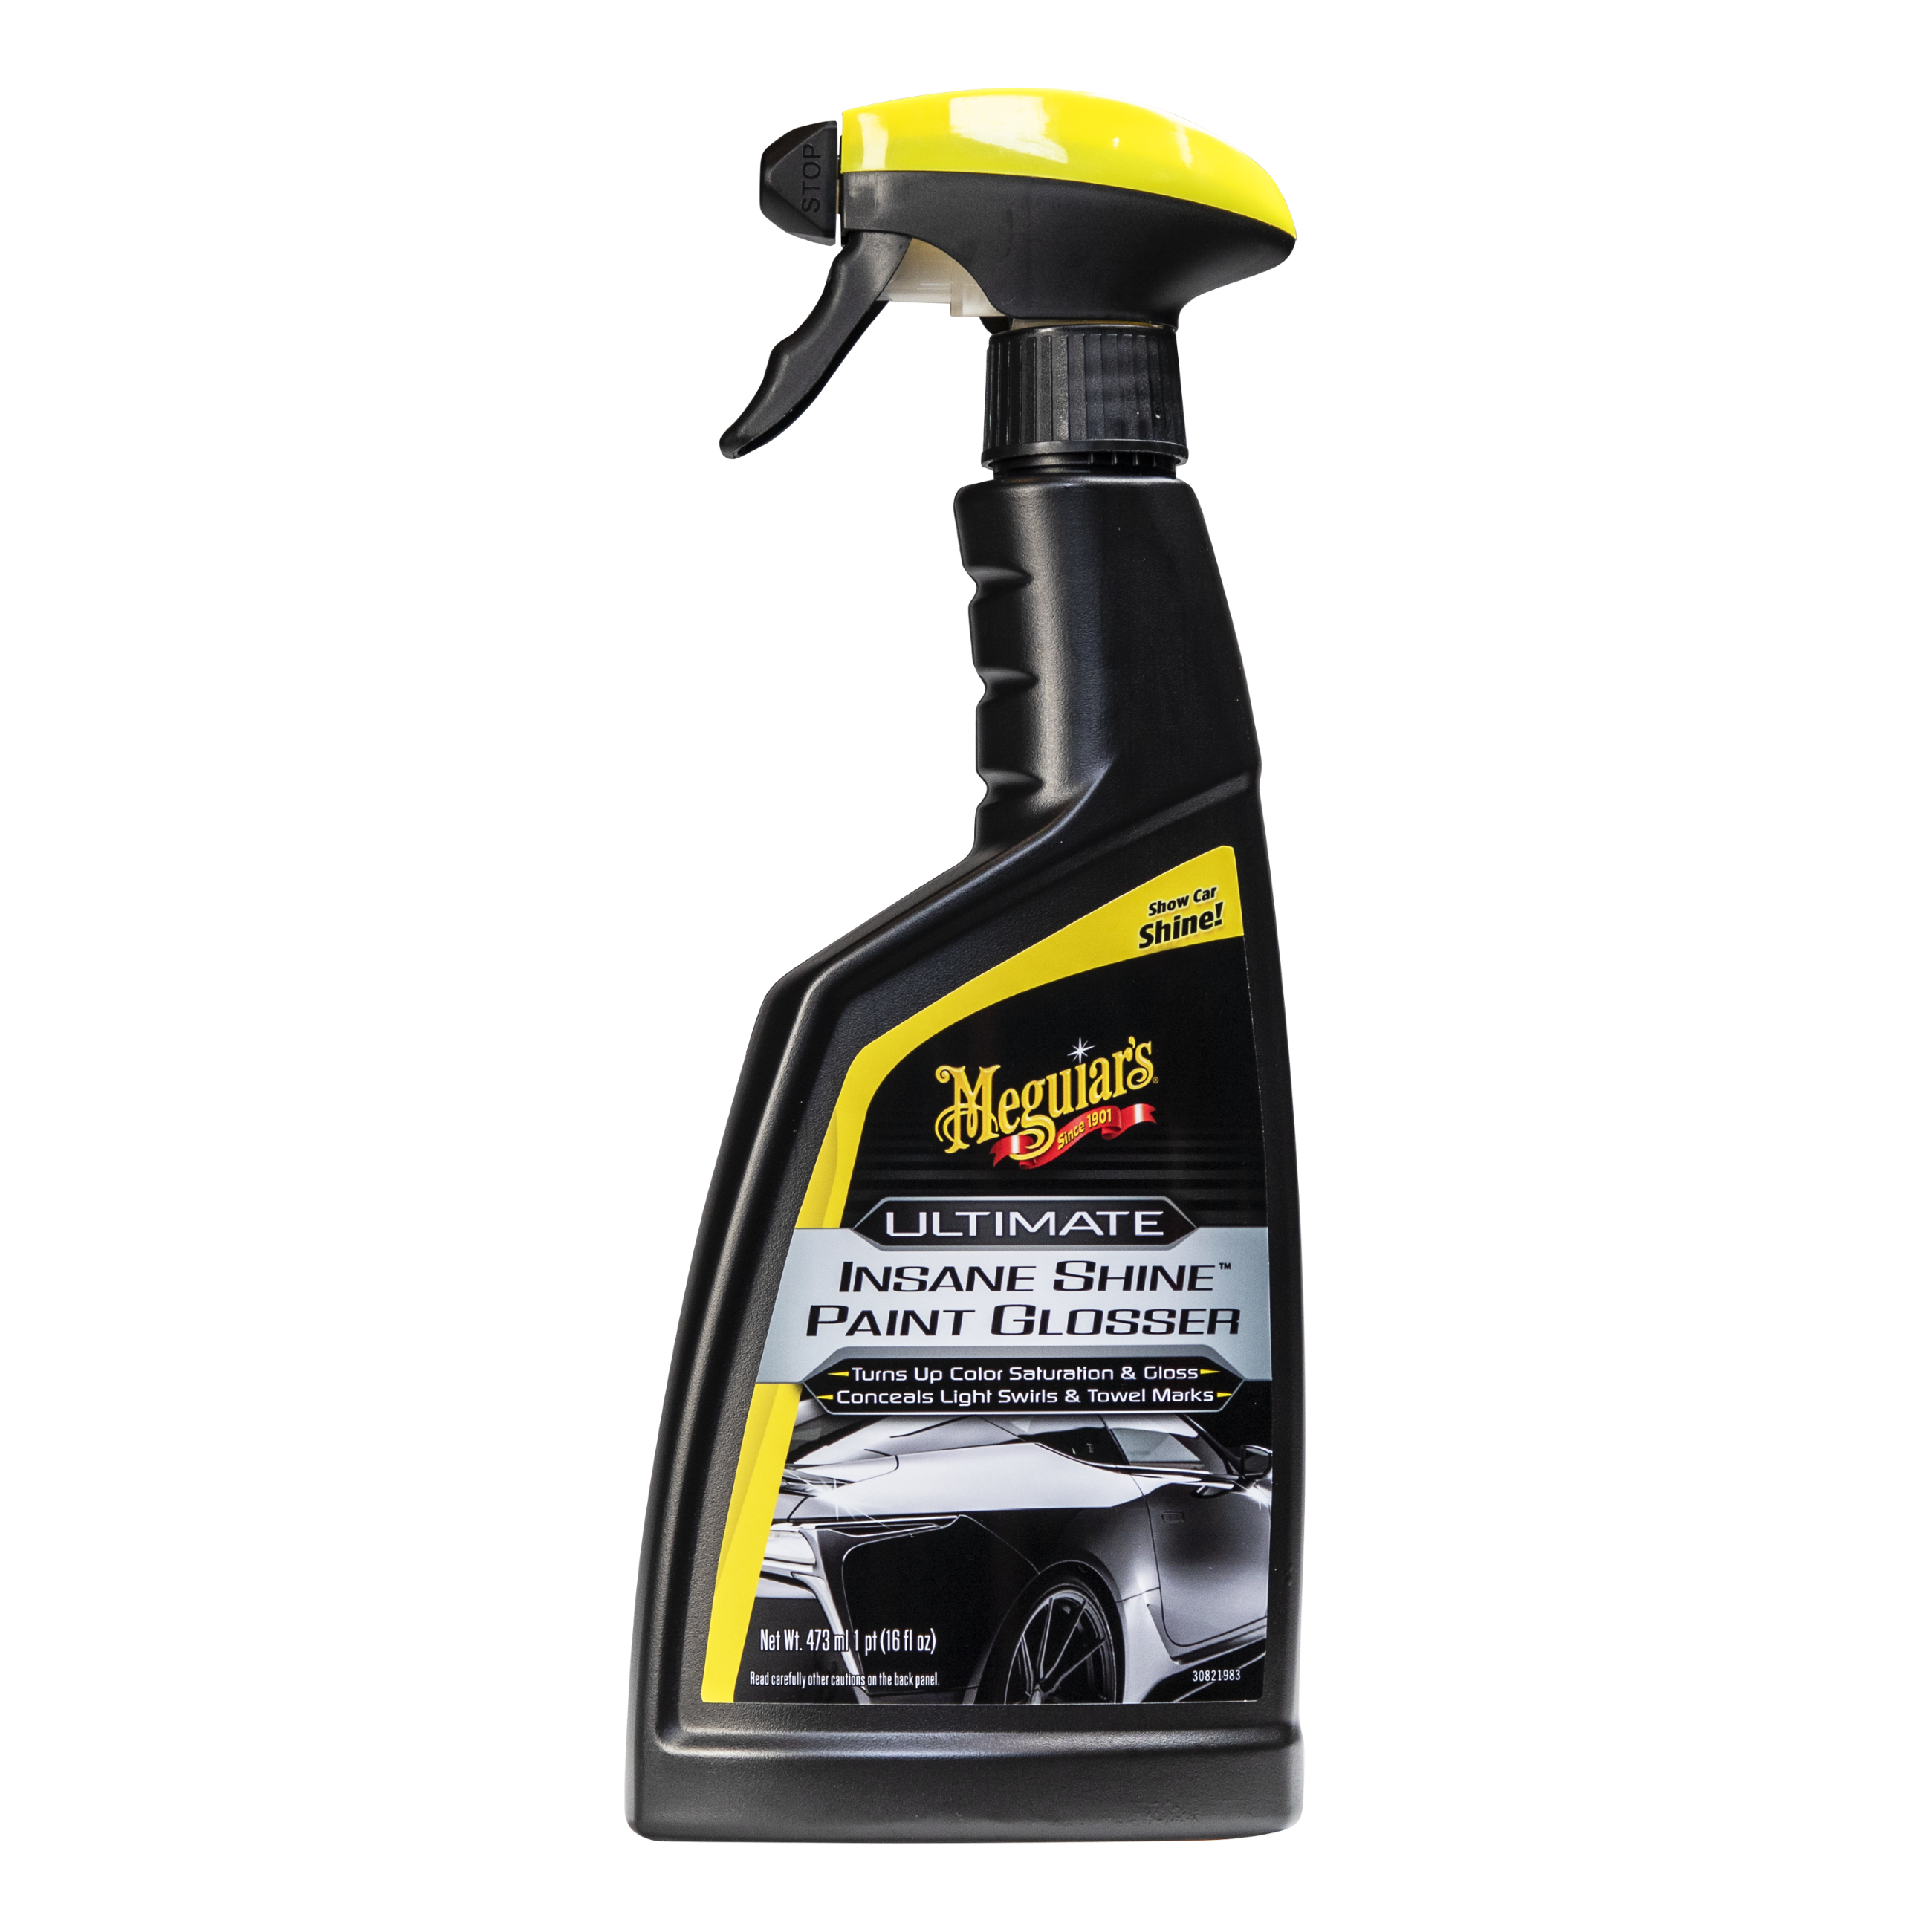 Meguiar's A3714 Water Spot Remover - Water Stain Remover and Polish for All  Hard Surfaces, 16 oz